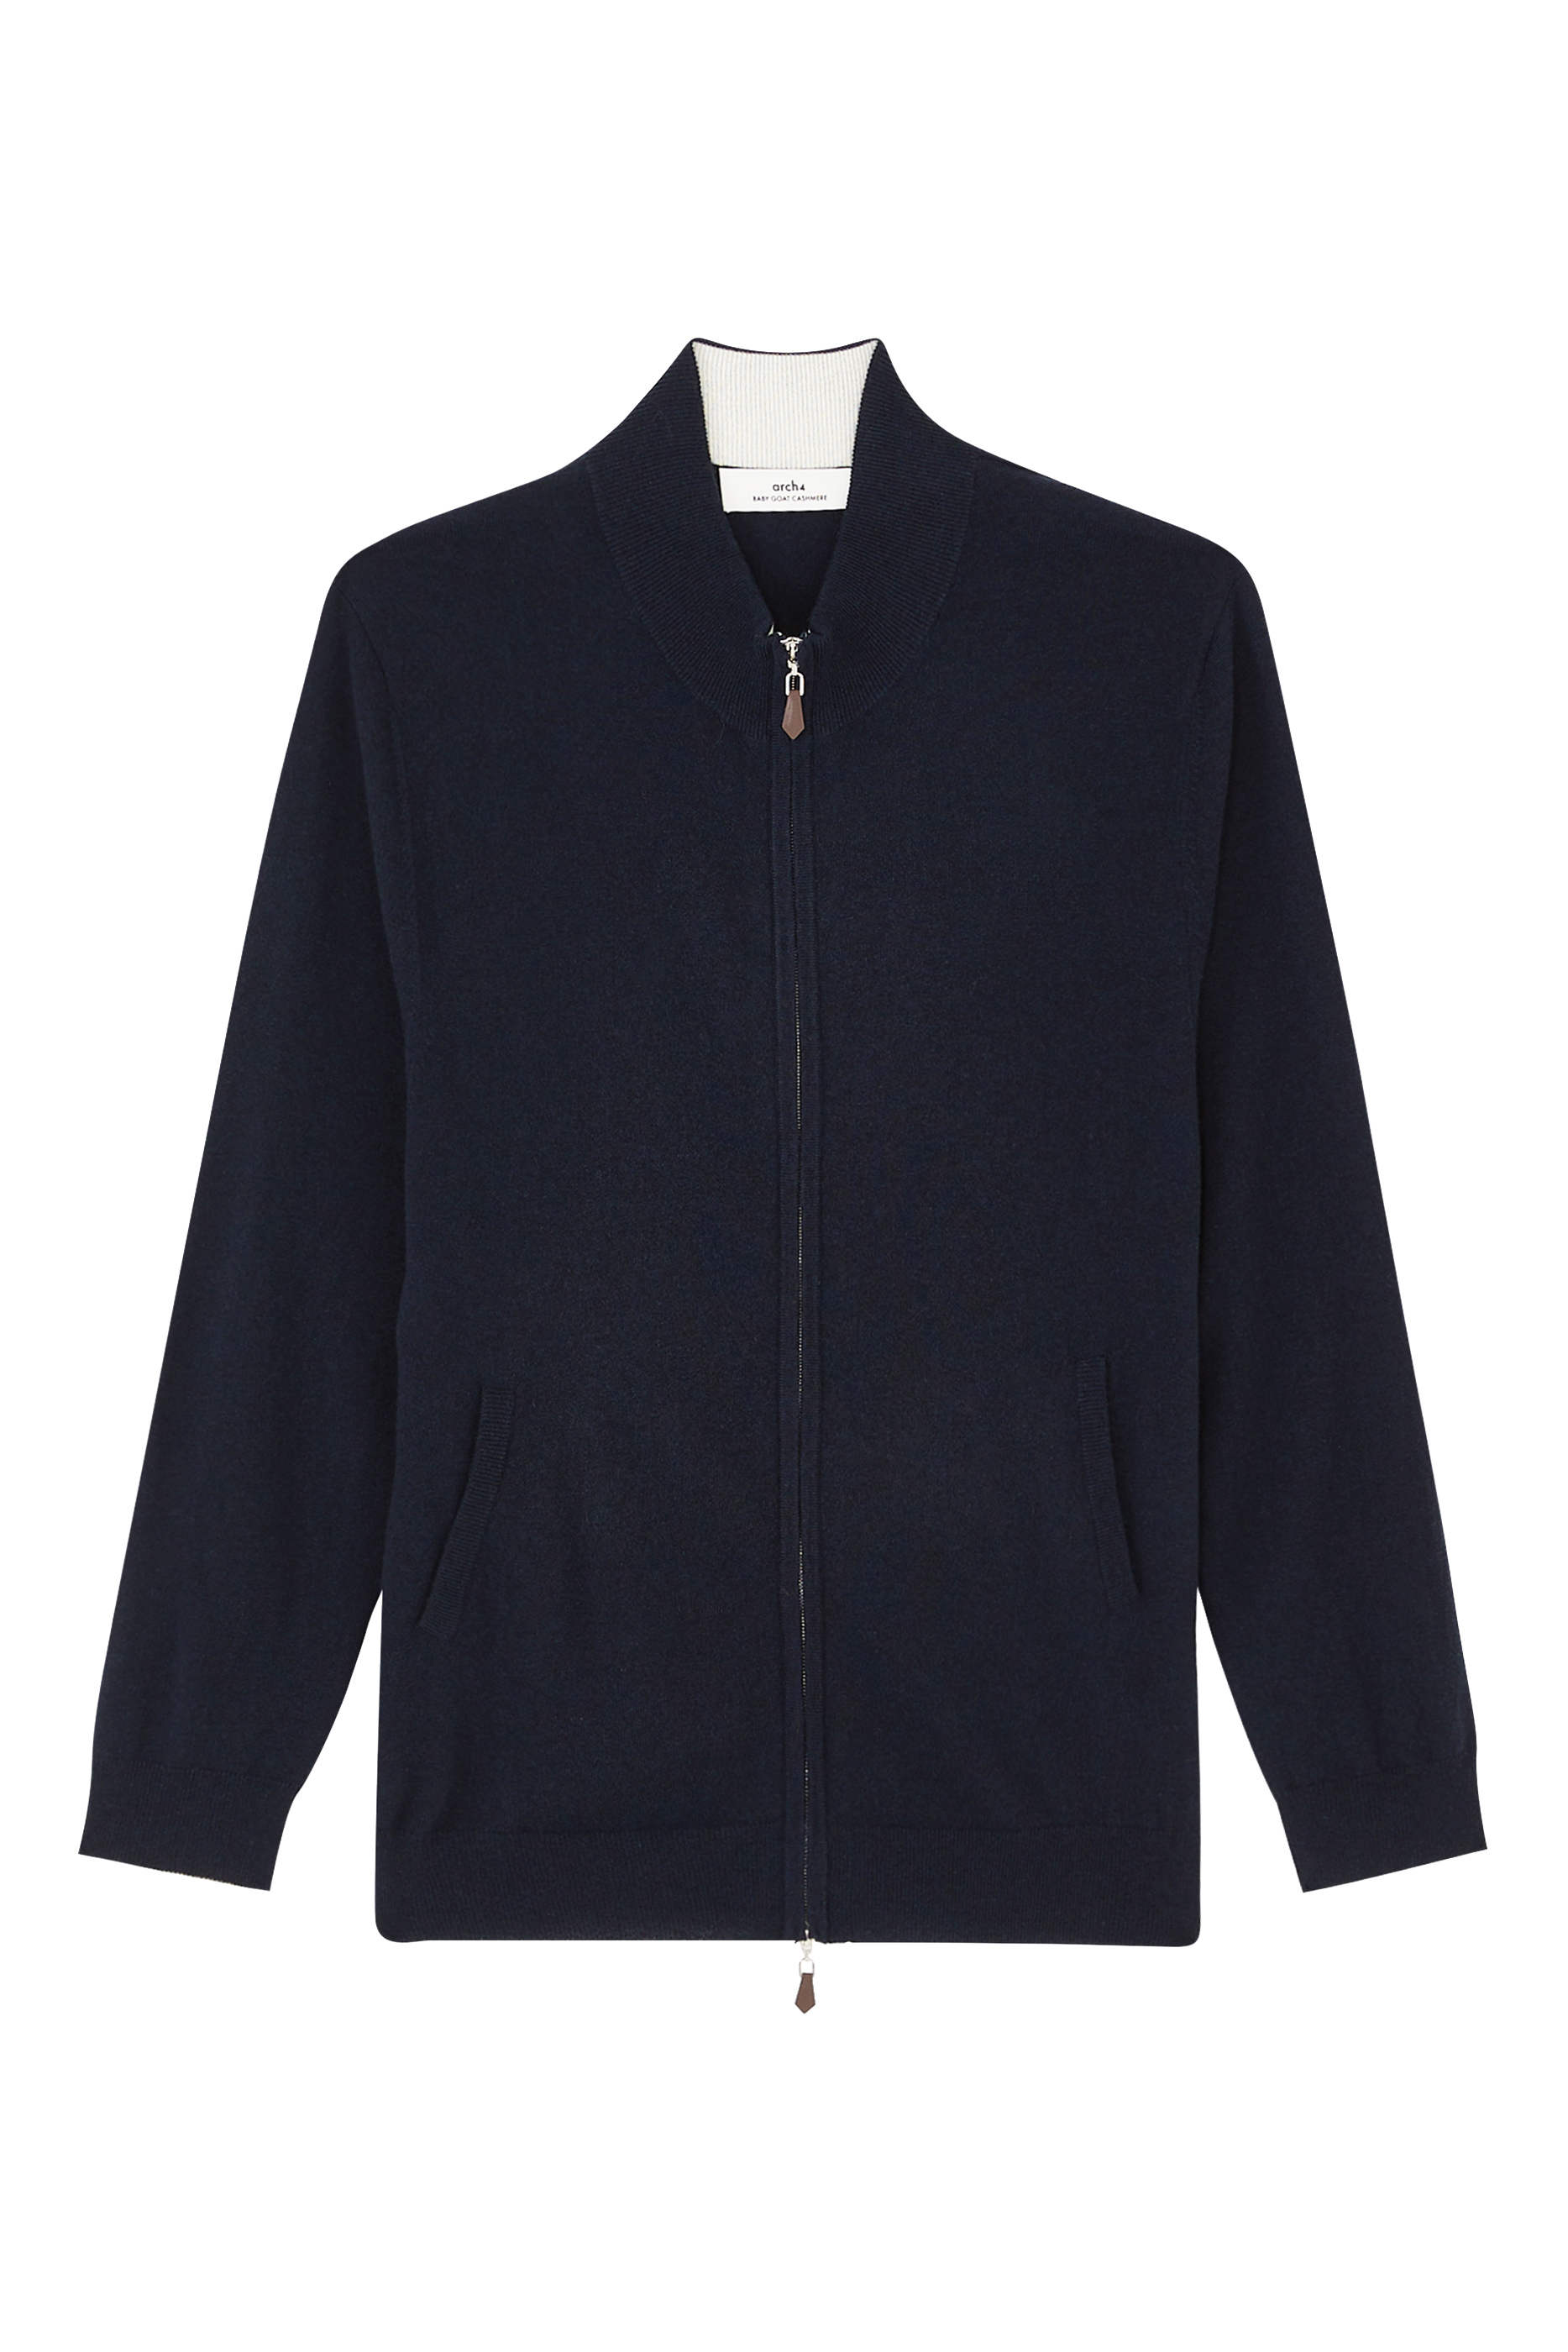 Buy Arch4 Mr Newquay Cardigan for Mens | Bloomingdale's UAE